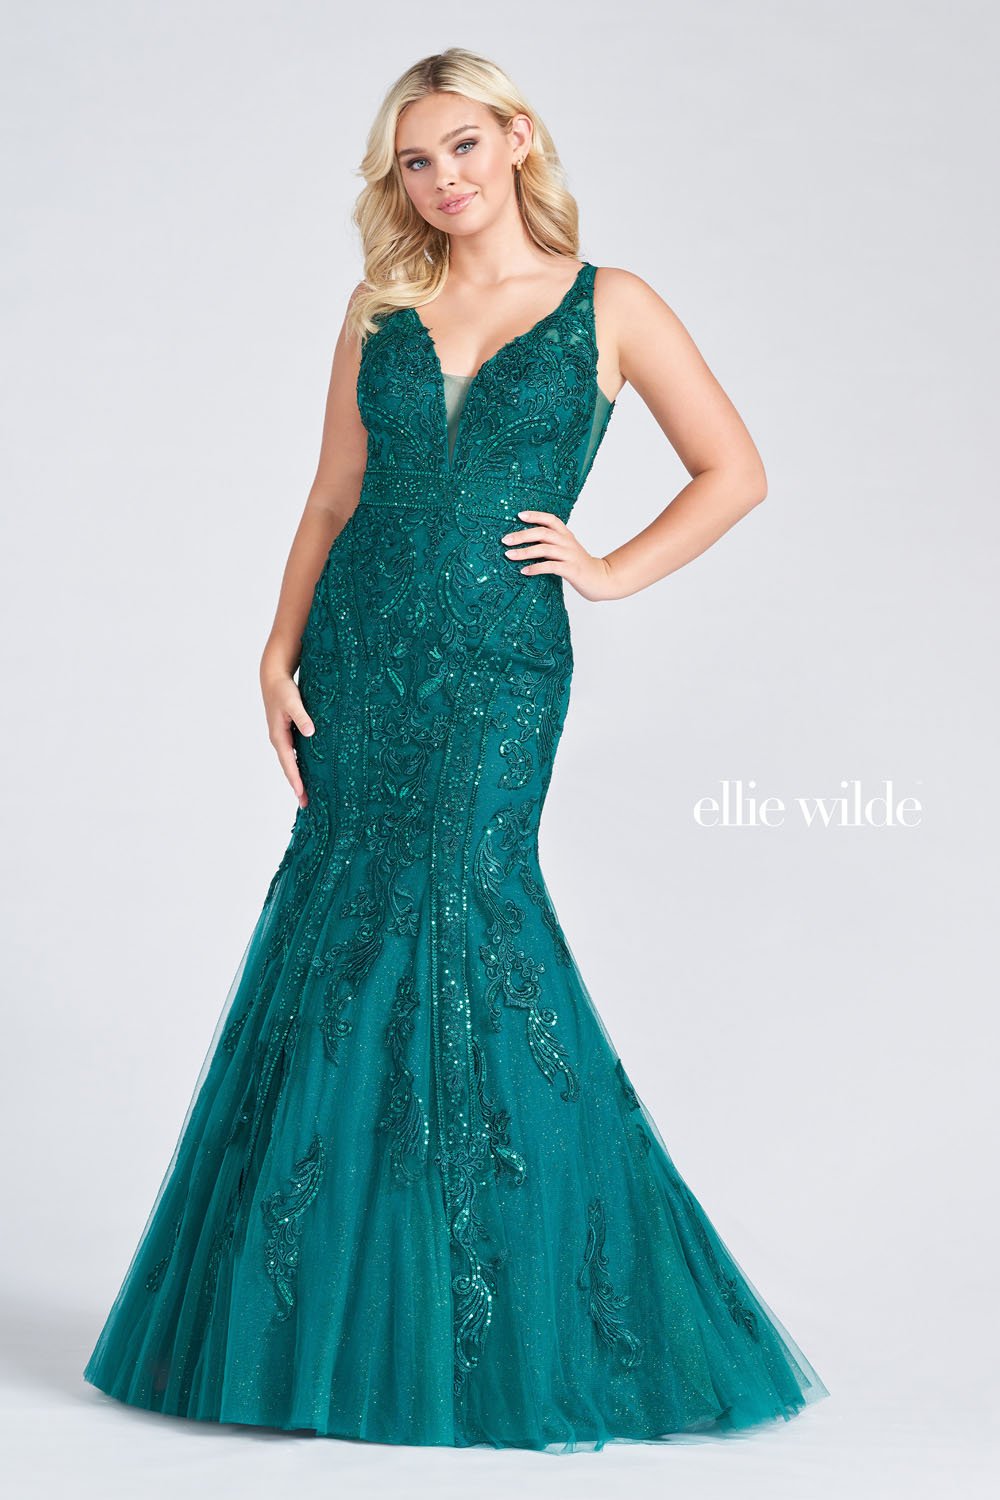 EMERALD GREEN THEME FORMAL DRESS GOWN